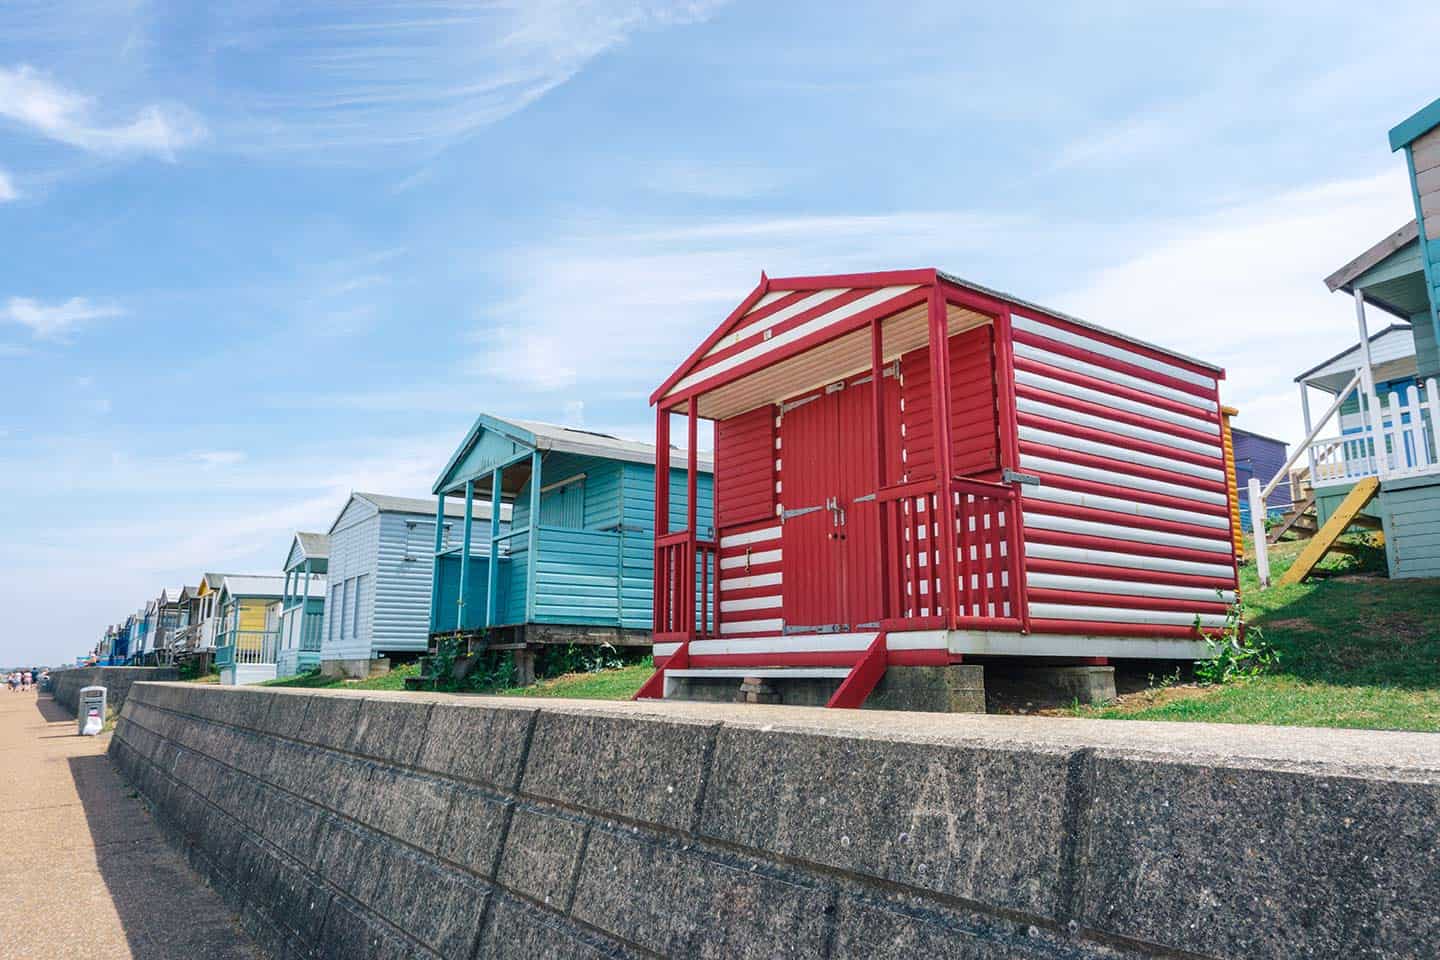 Whitstable colourful beach huts | Whitstable day trip from London by train